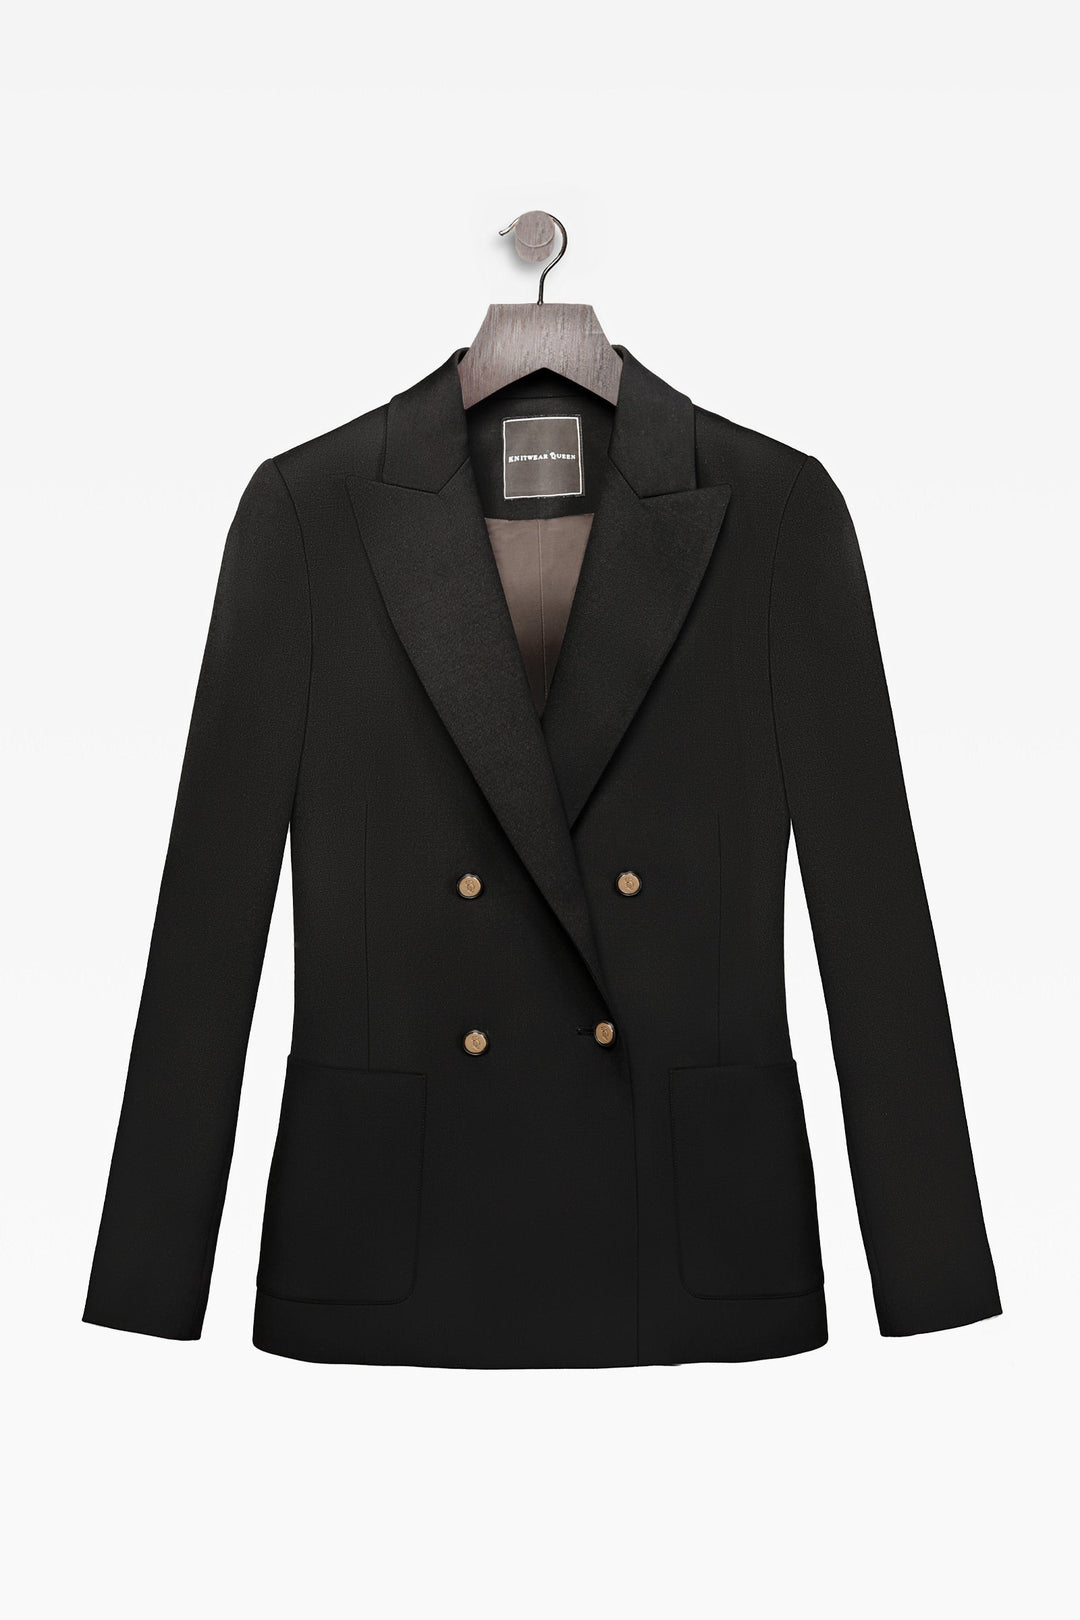 Carrie Black Double Breasted Jacket: Tailored Elegance Essential for Modern Women